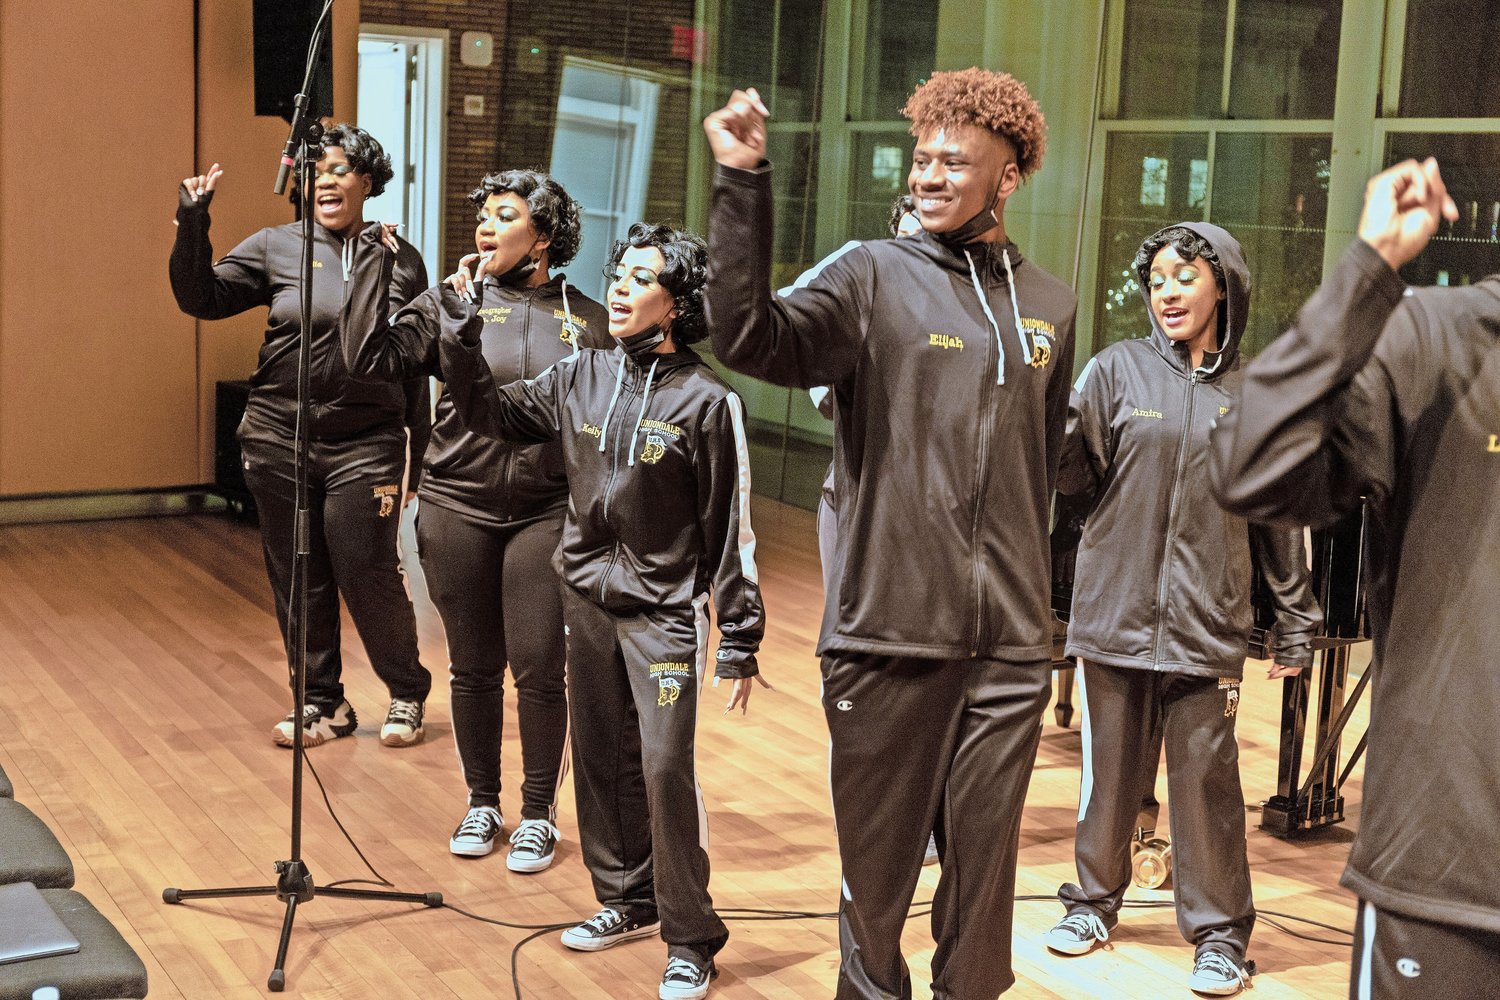 The Show Choir members blasted through a sound check onstage at Carnegie Hall. The students travel and rehearse in track suits, and then switch to their costumes.